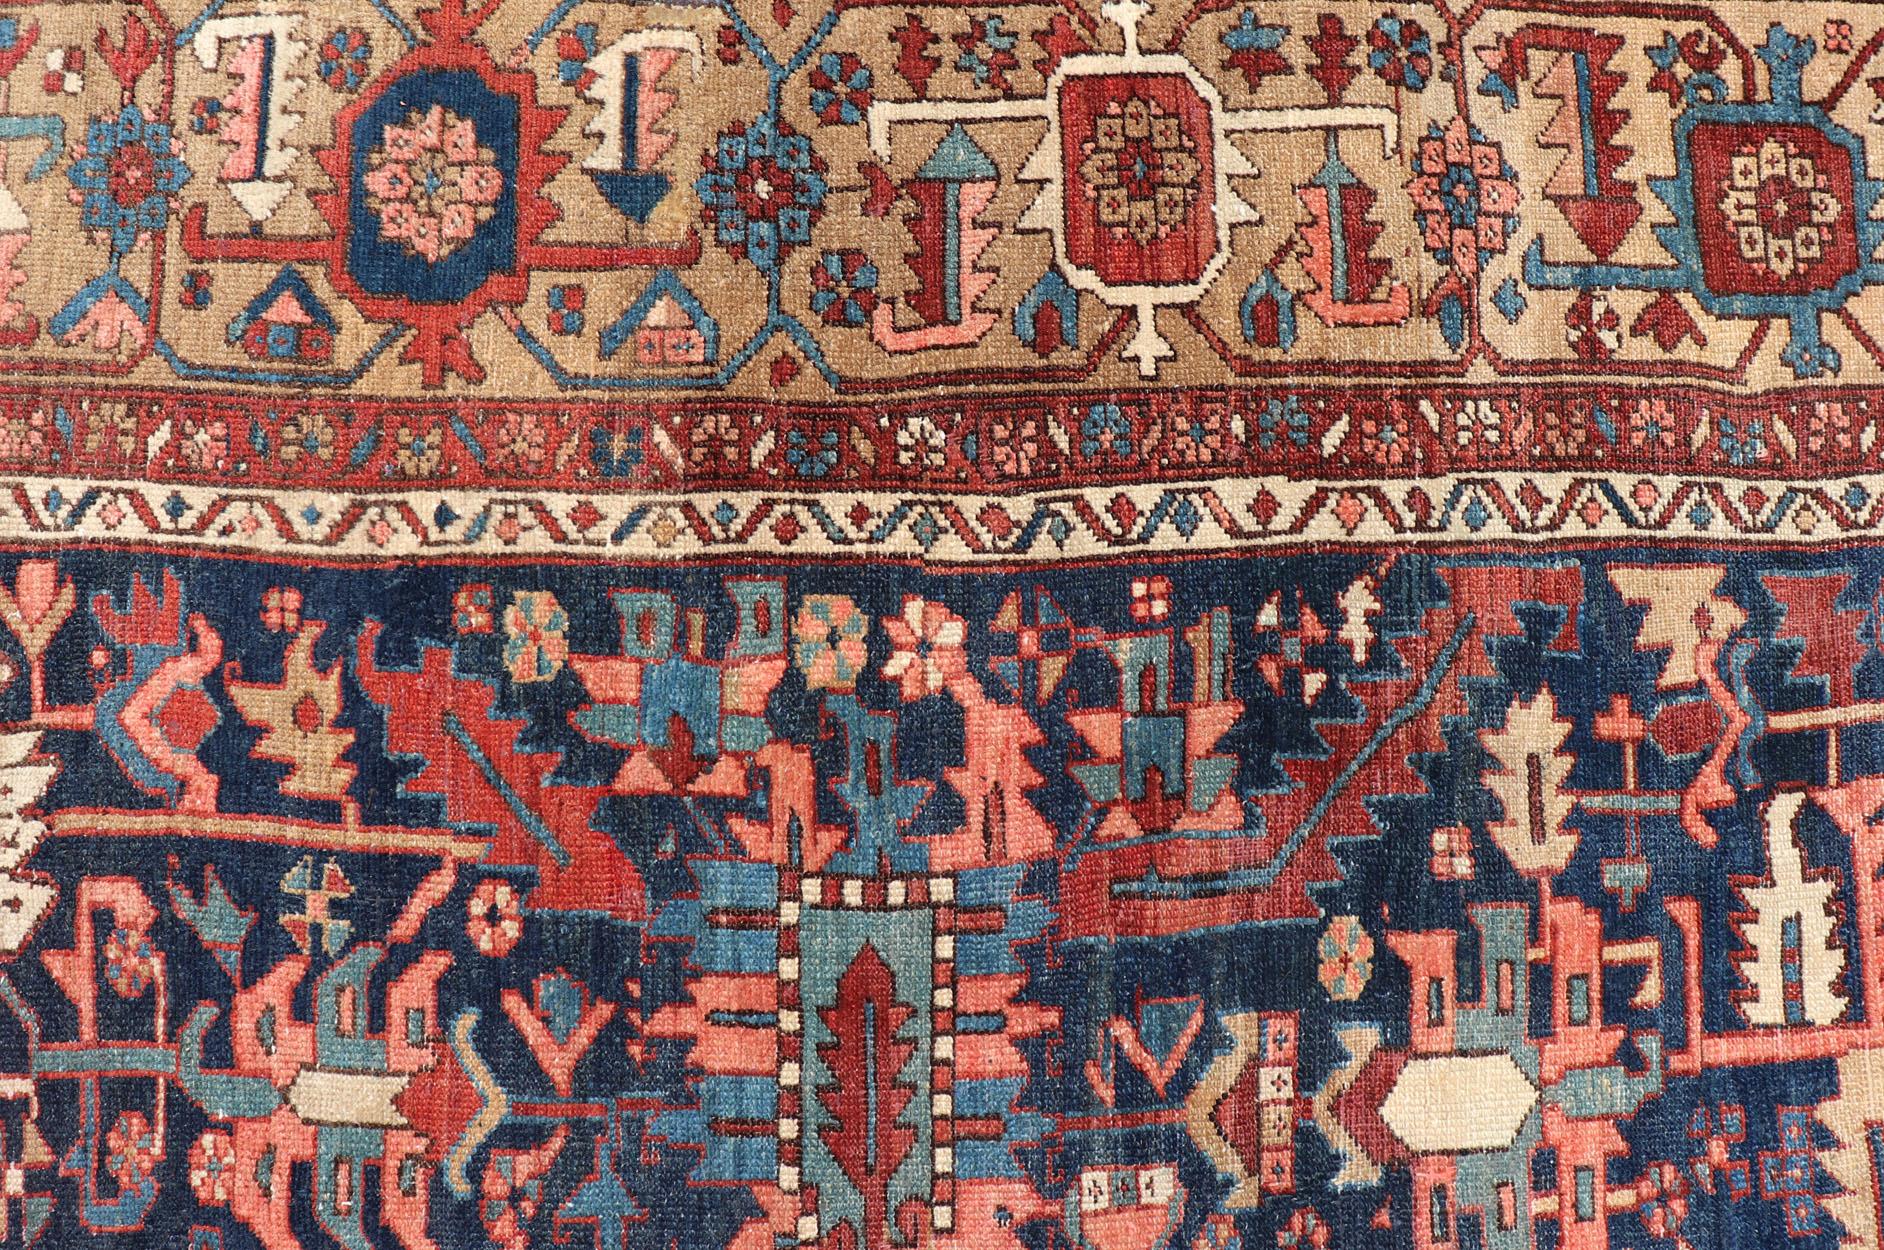 Antique Persian all-over Serapi-Heriz rug with all-over geometric design. Rug / W22-0208, country of origin / type: Iran /Serapi-Heriz, circa 1910. Antique Heriz, Antique Serapi, antique Goravan Heriz
Measures: 8'8 x 11'3 

This antique